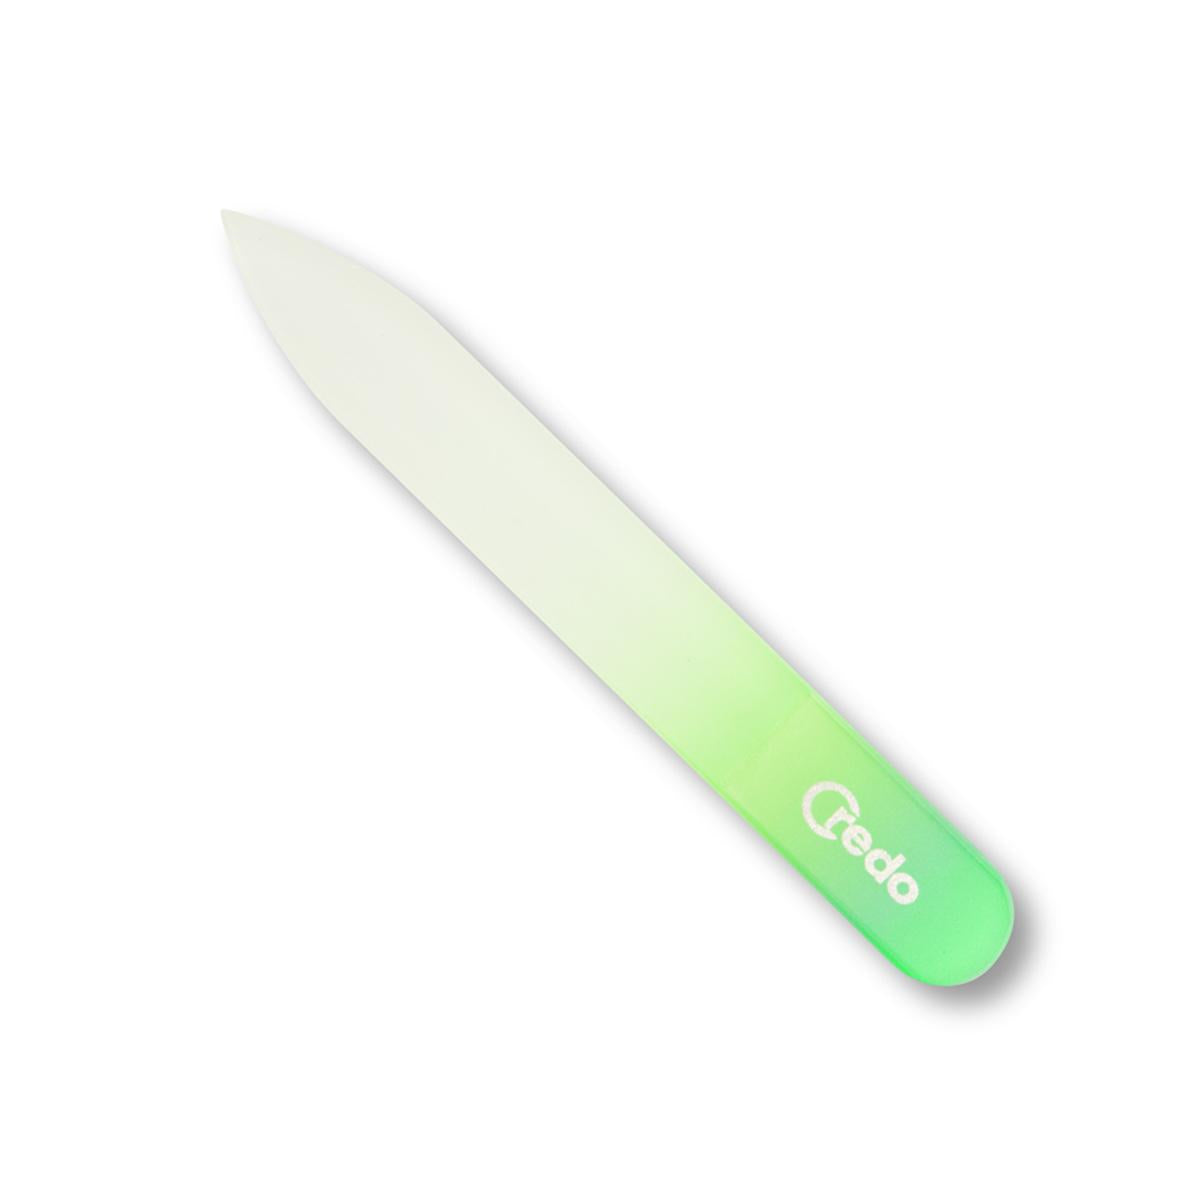 Primary image of Credo Small Green Glass Nail File 90mm Nail File